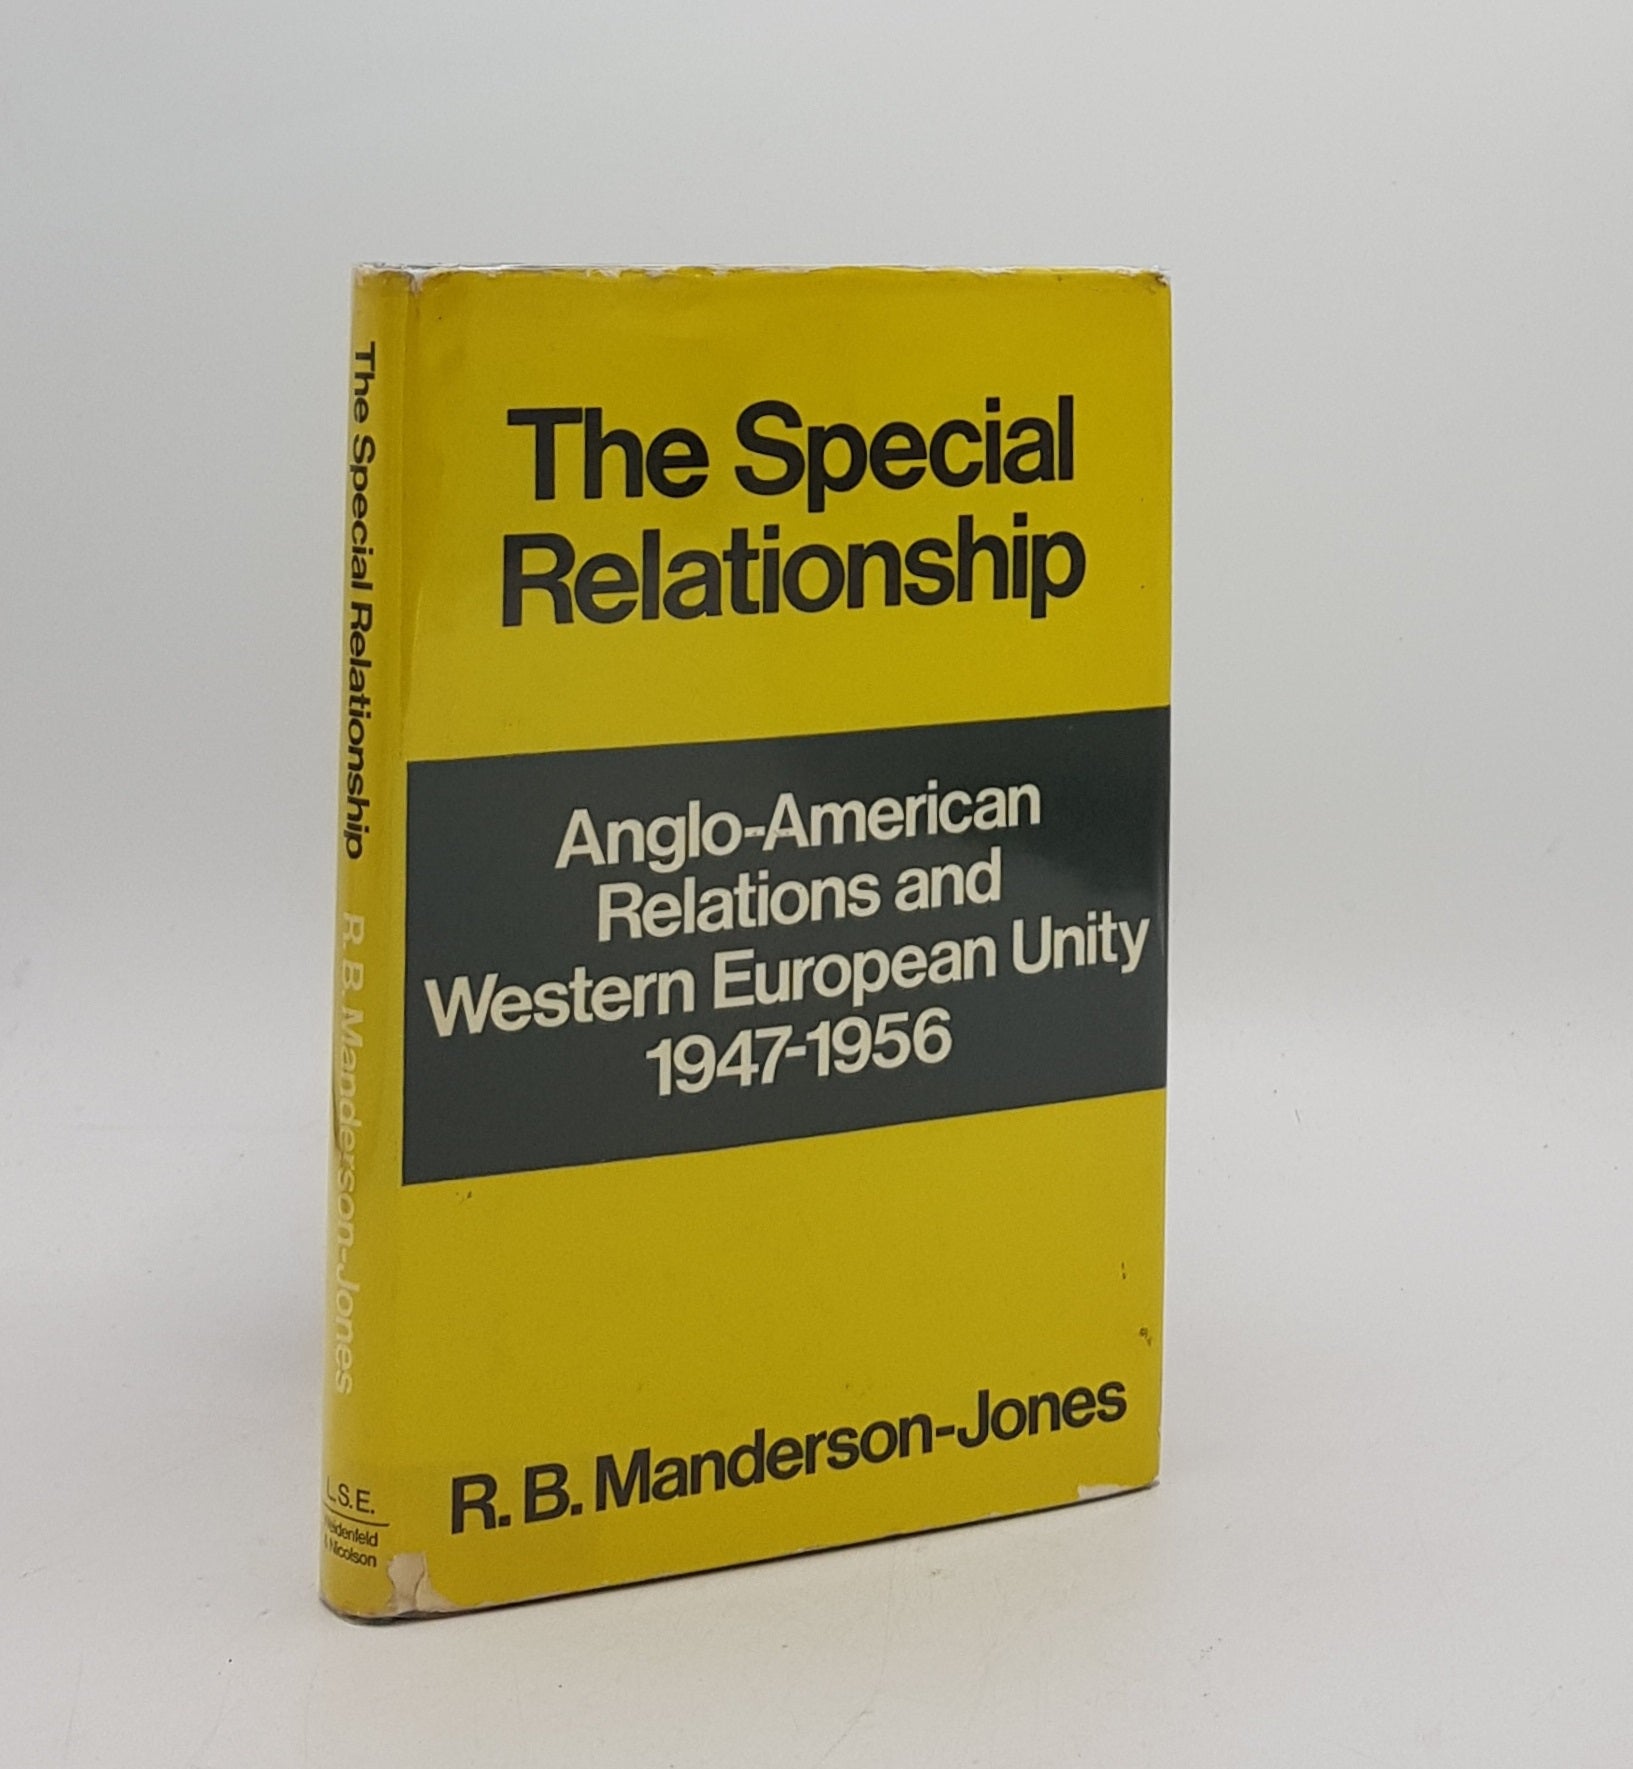 MANDERSON-JONES R.B. - The Special Relationship Anglo-American Relations and Western European Unity 1947-56